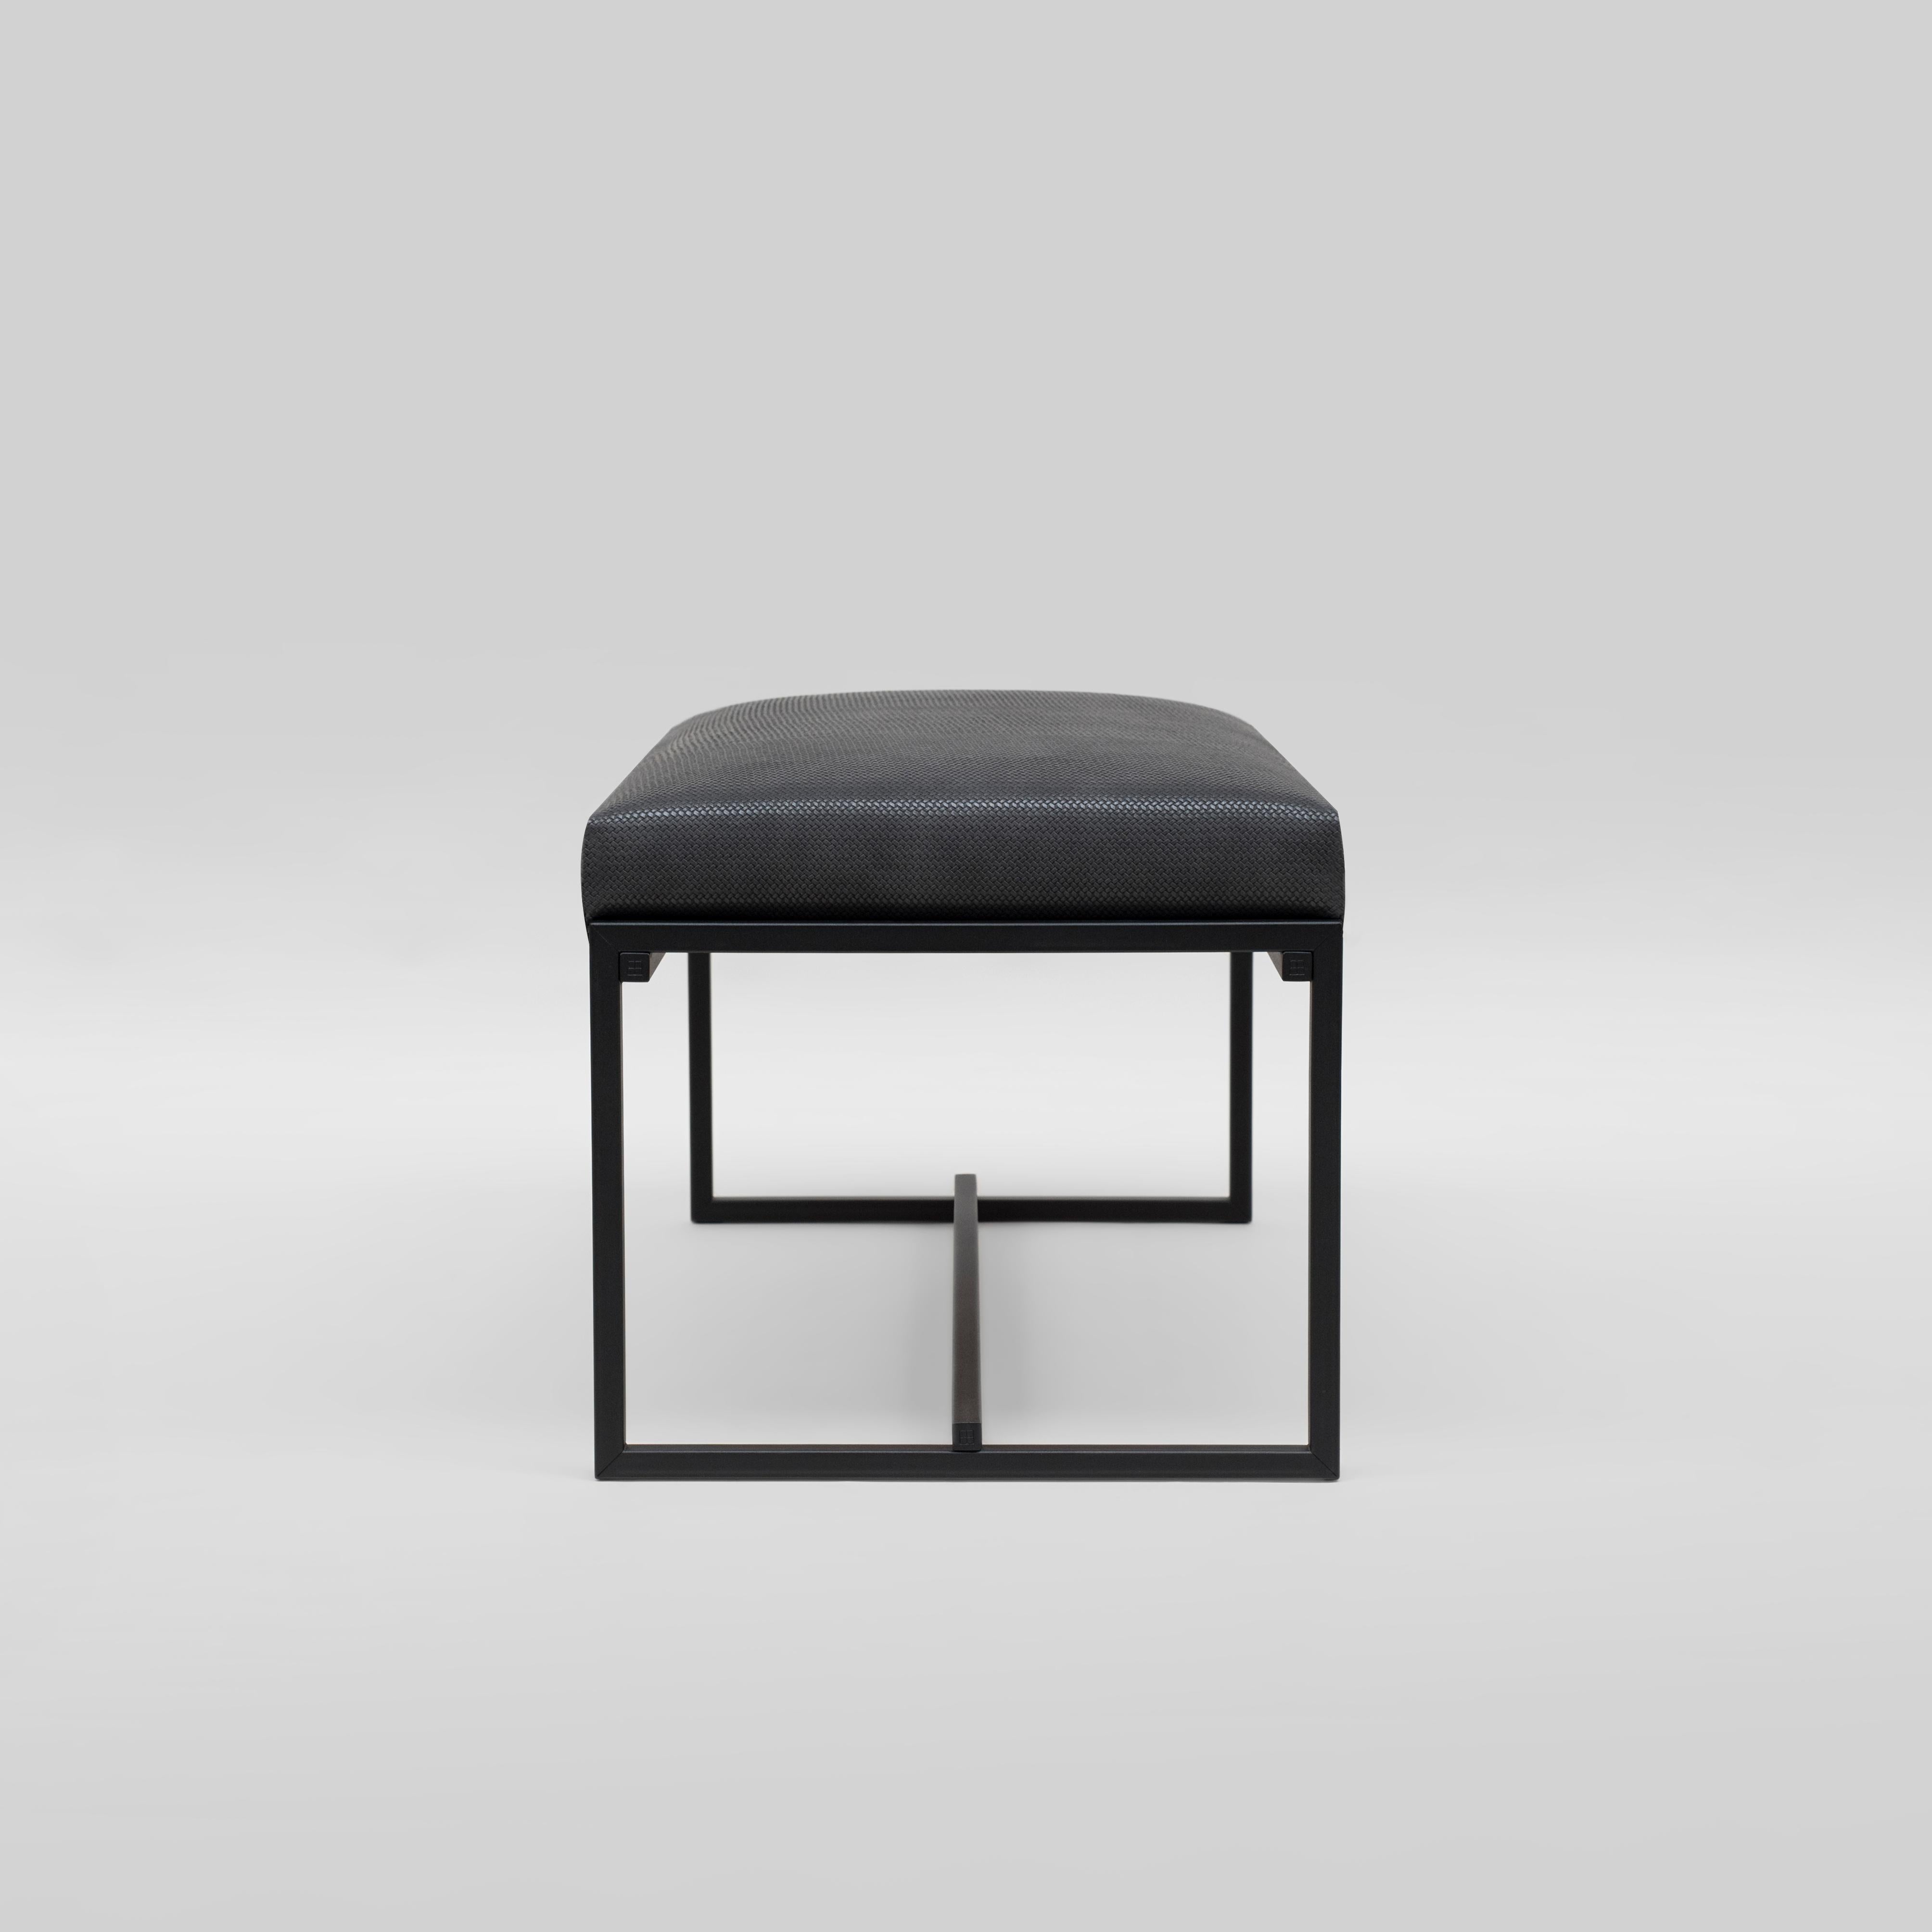 Duet grace GB03

Frame charcoal
Cast part charcoal
Fabric Z/04 (Q3)
Measures: L 90 x W 50 x H 43

Upholstered bench on a slender metal frame. A light weight construction, easy to pick up and move. Customisable in size; can be used as footrest